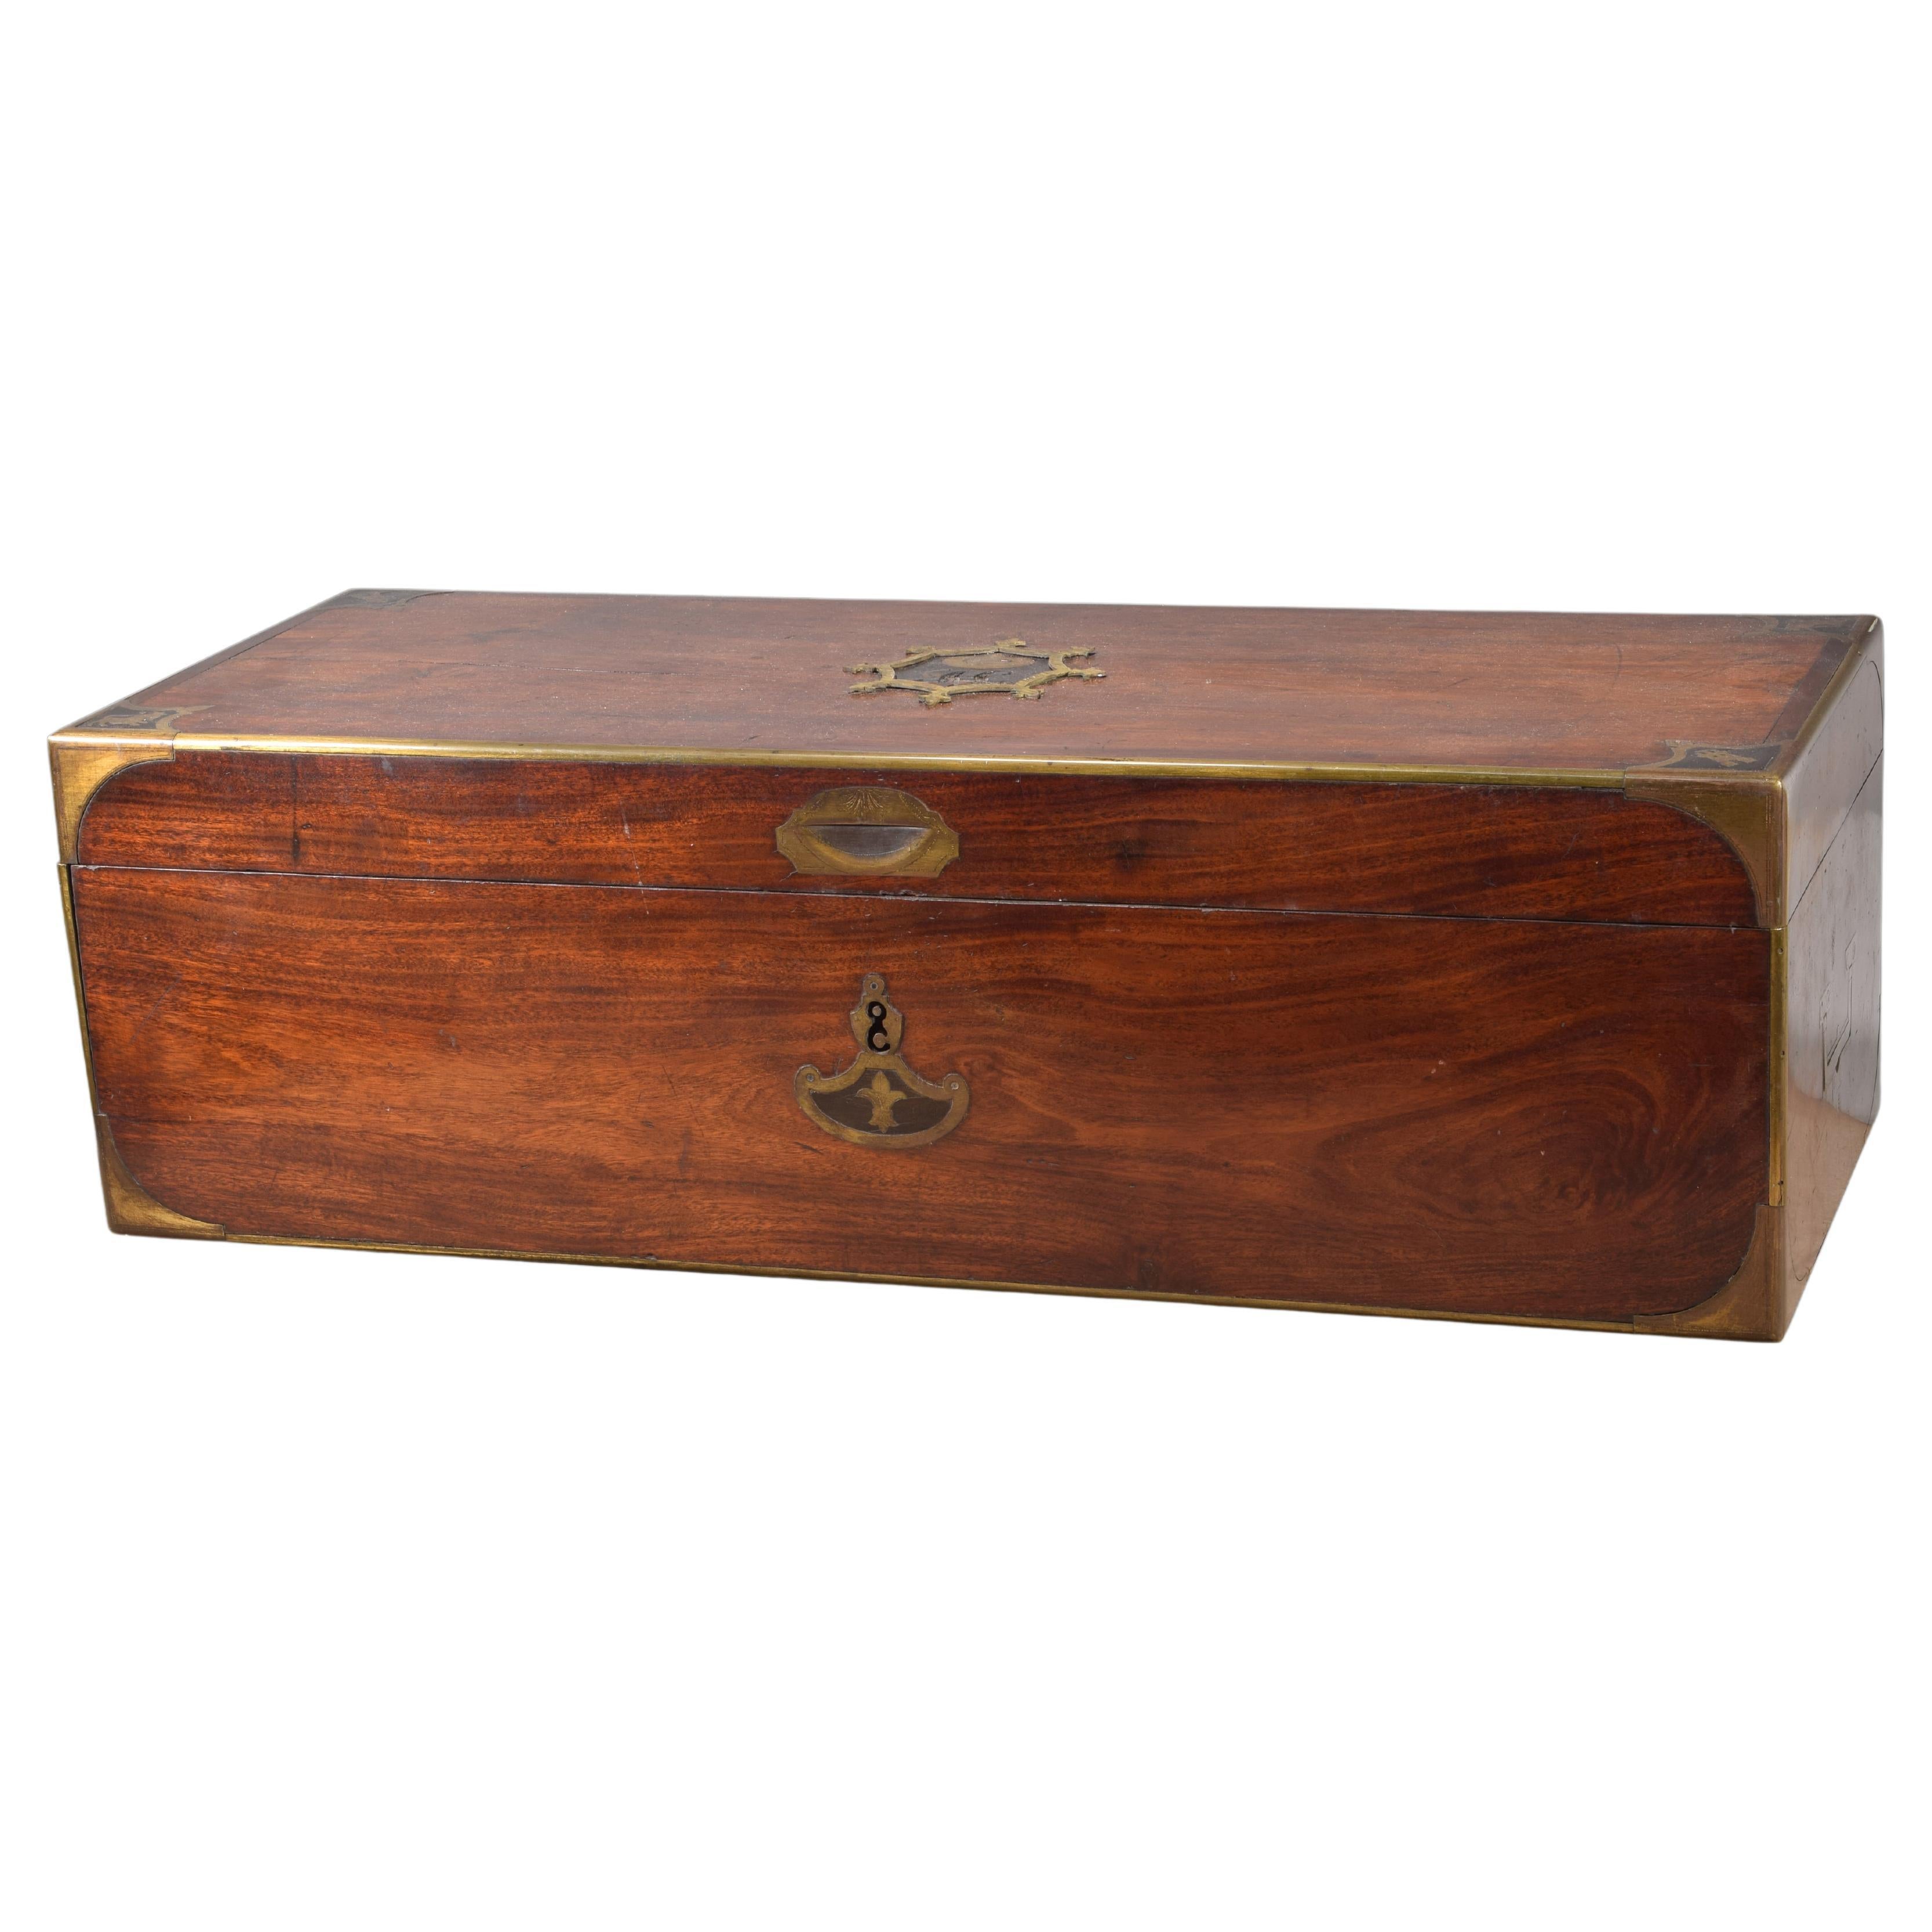 Box or casket with royal monogram. Mahogany wood, metal. Spain, 19th century. For Sale